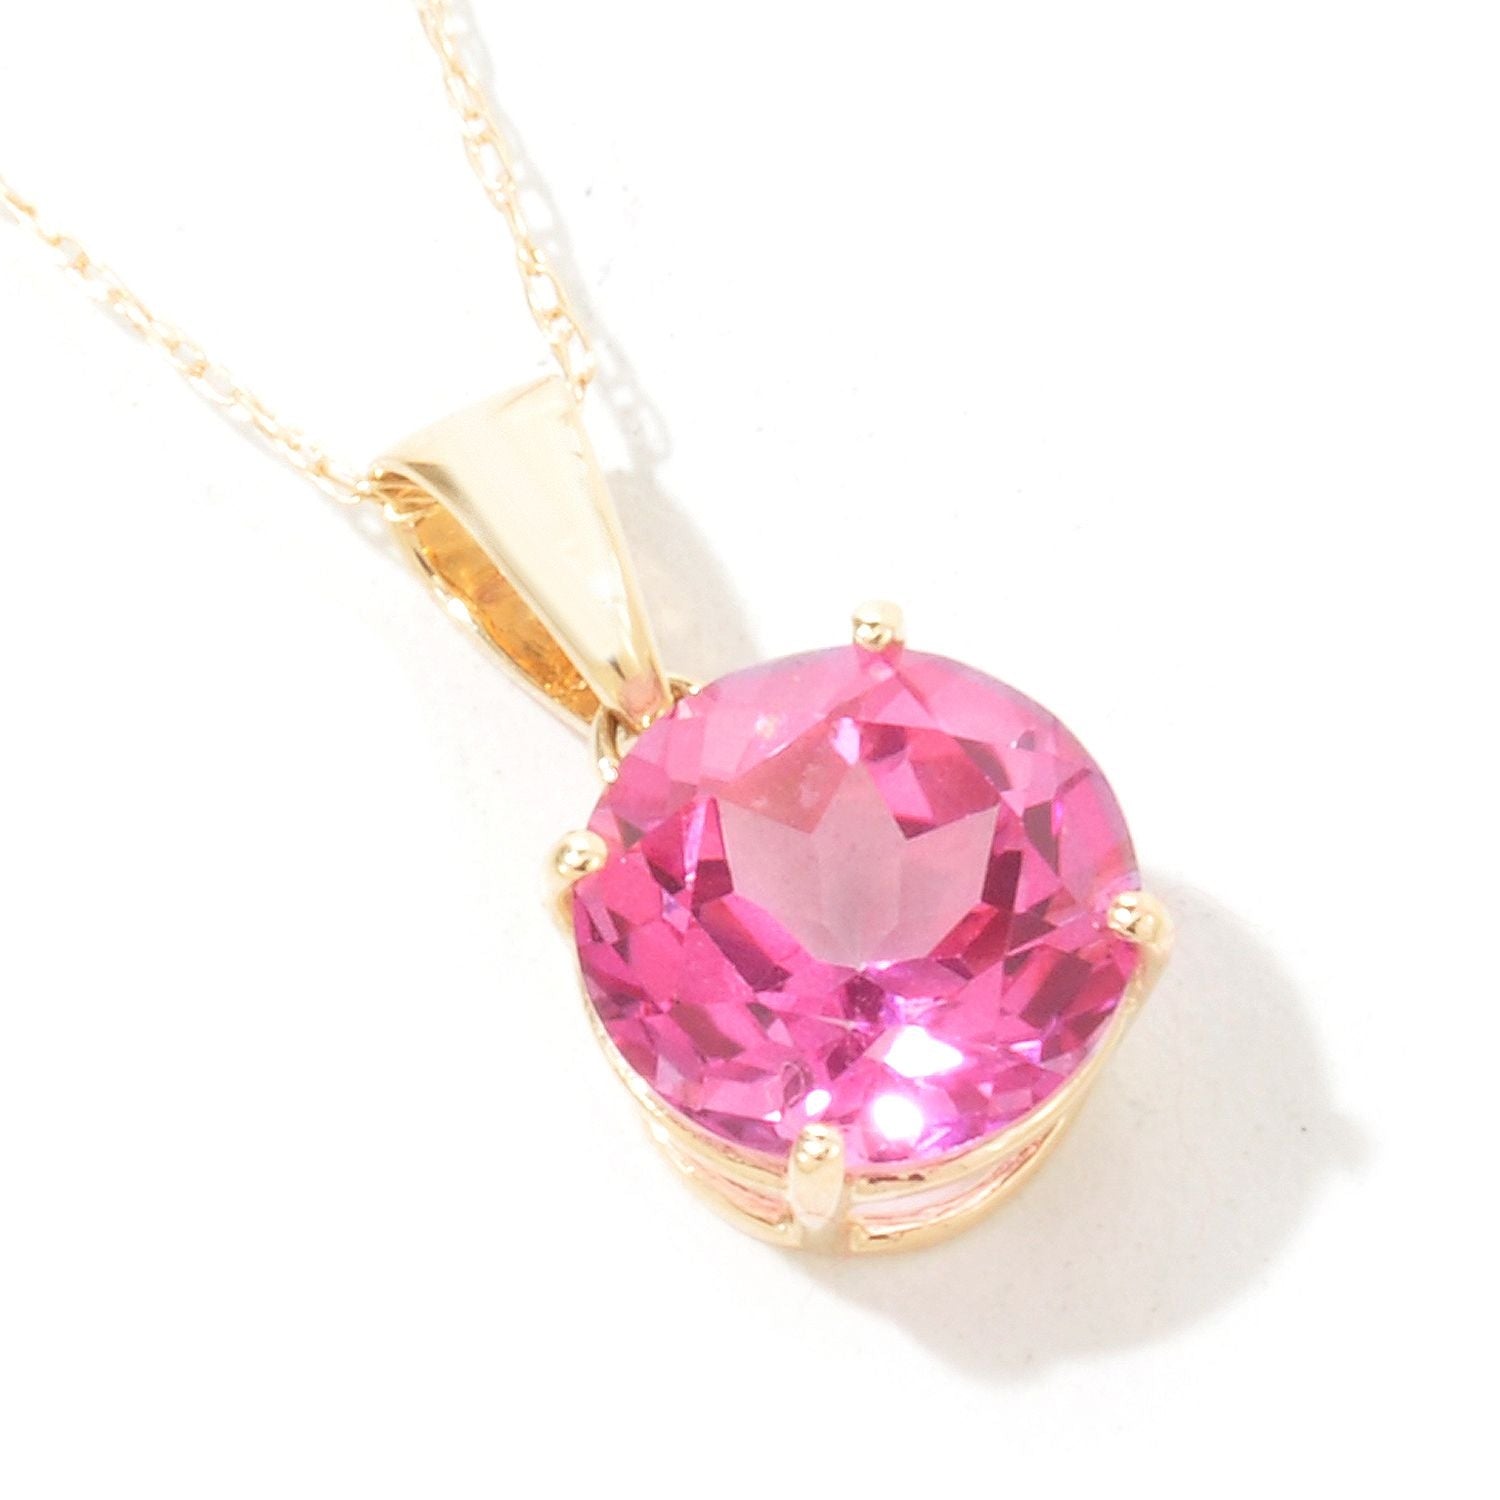 10KT Yellow Gold Pink Topaz Round Shape Cushion Pendant With 18" Chain - Pinctore